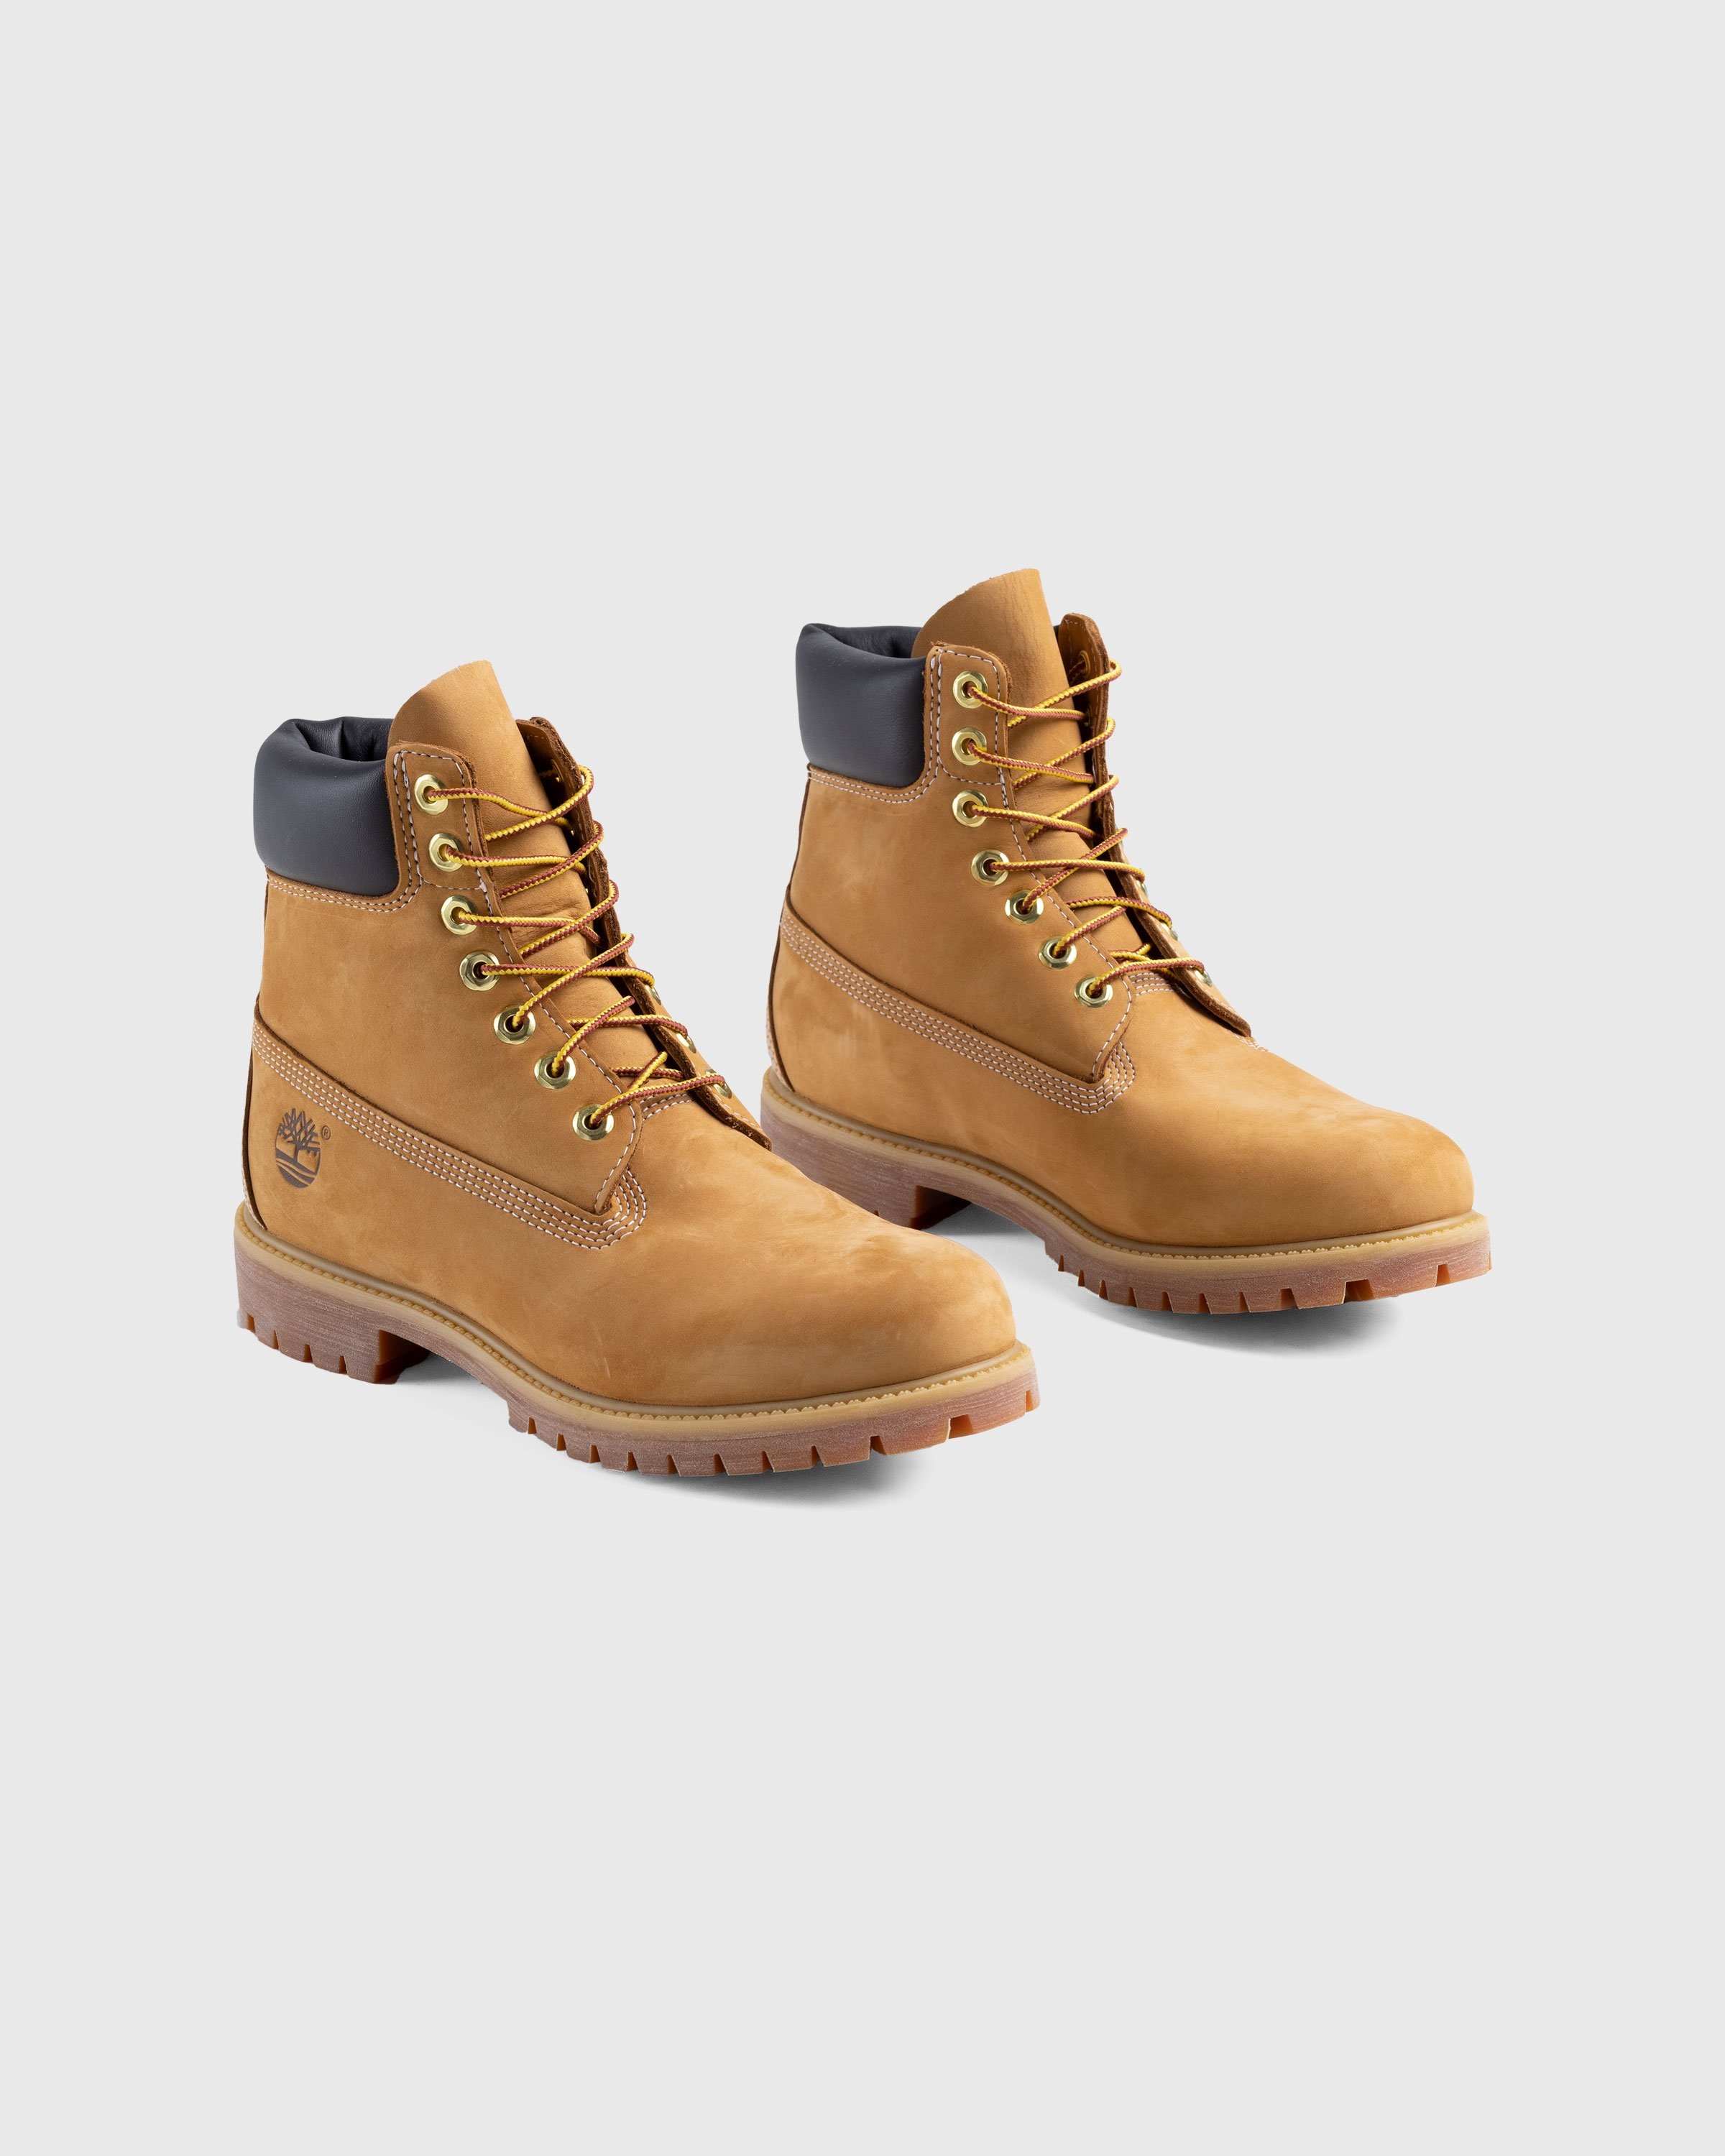 Timberland – 6 Inch Premium Boot Yellow - Laced Up Boots - Yellow - Image 3